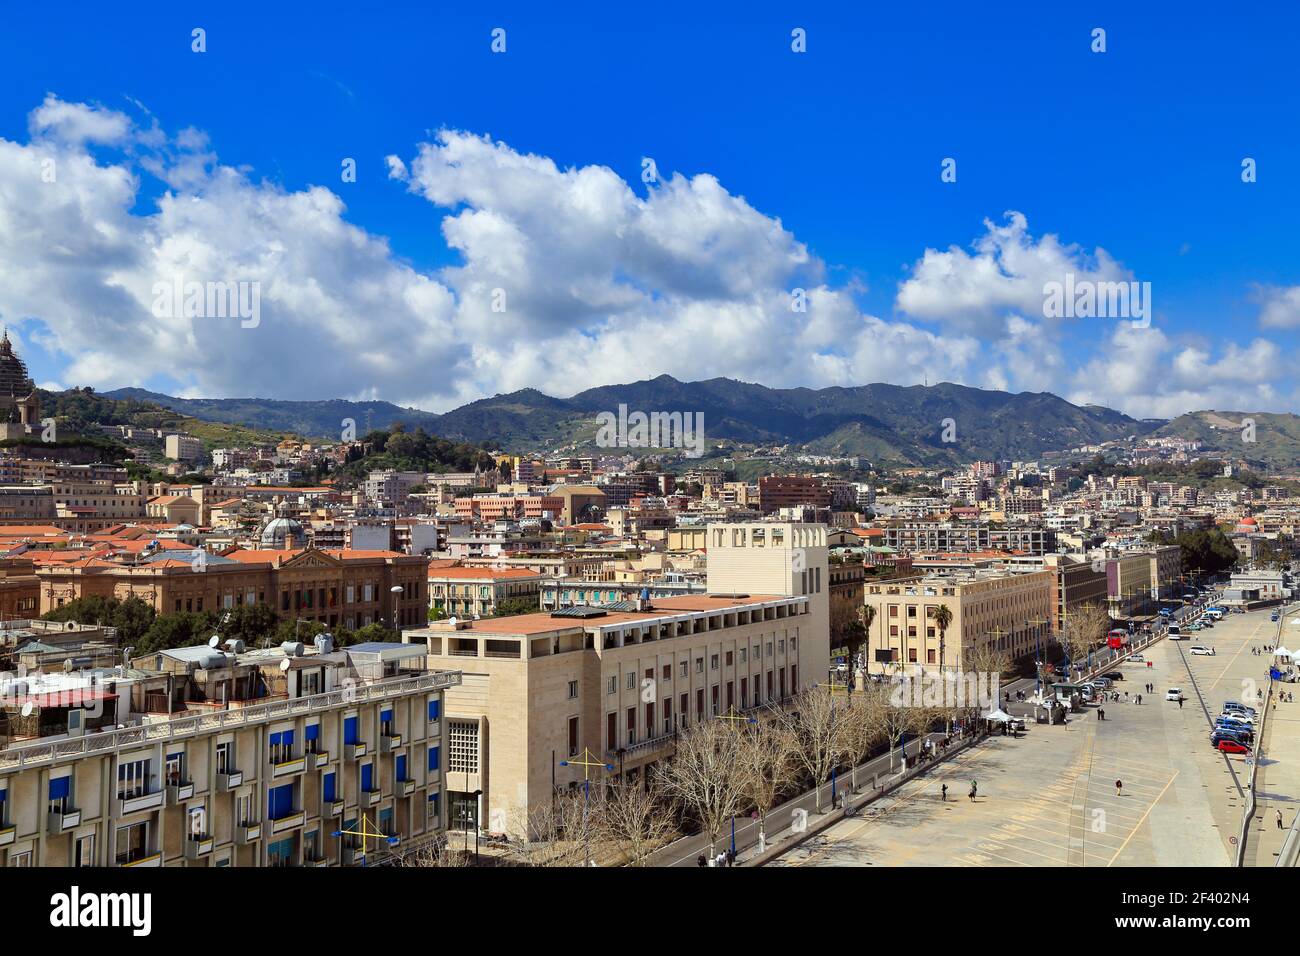 View across the rooftops from the port of Messina, Sicily, with the Peloritani mountains in the distance Stock Photo